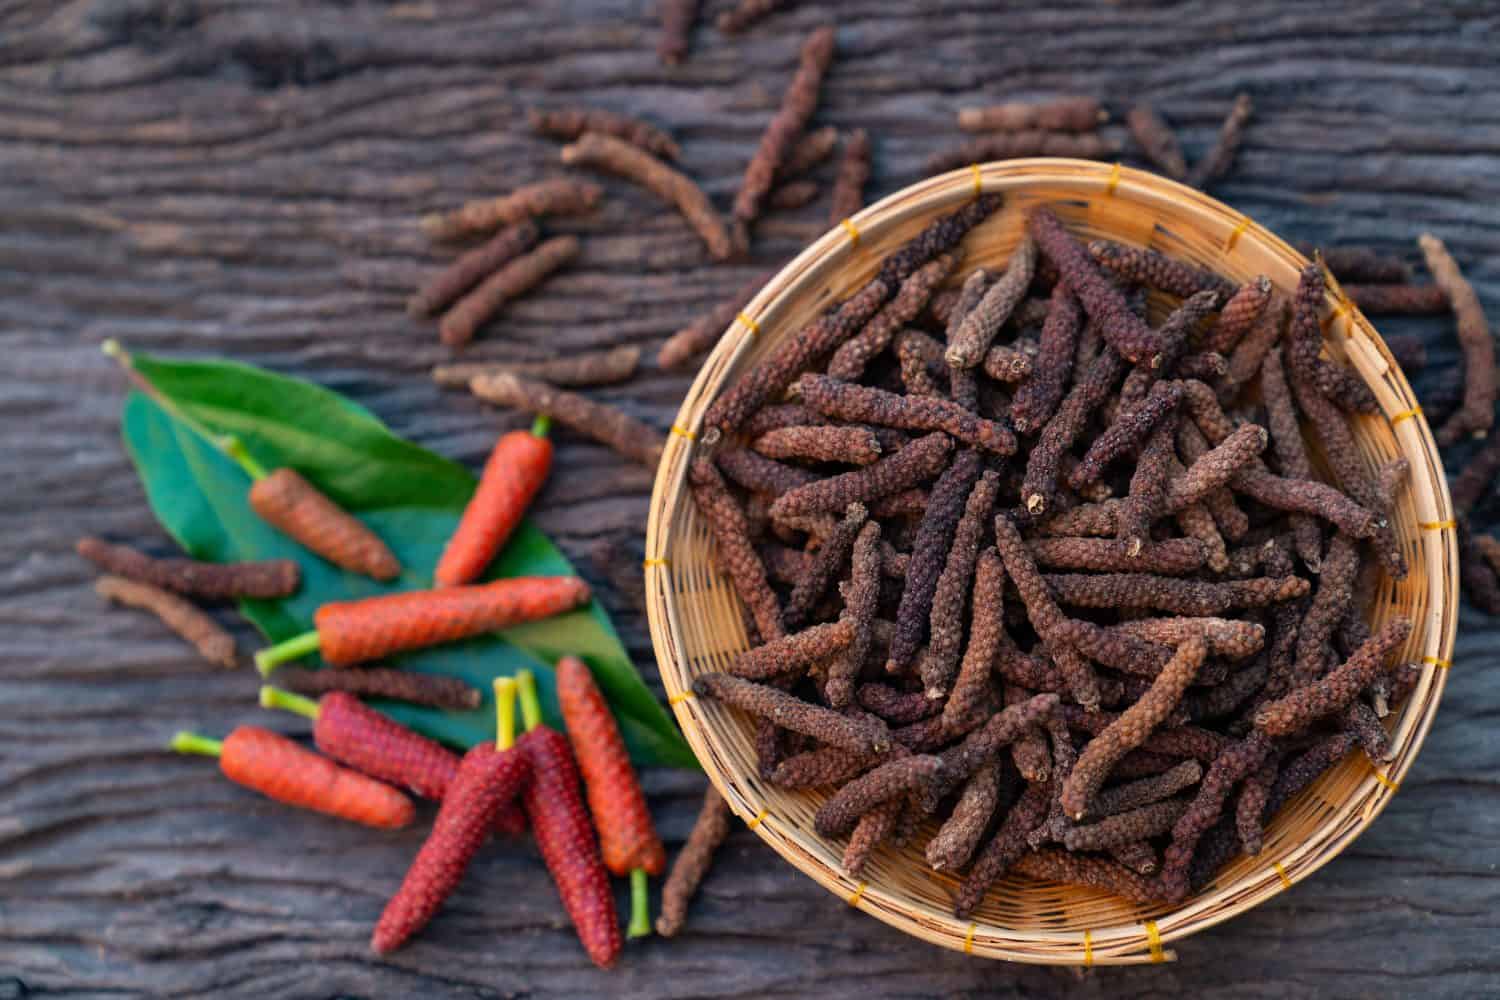 Long Pepper, Indian long pepper, Javanese long pepper (Piper retrofractum Vahl), spices and herbs with medicinal properties.